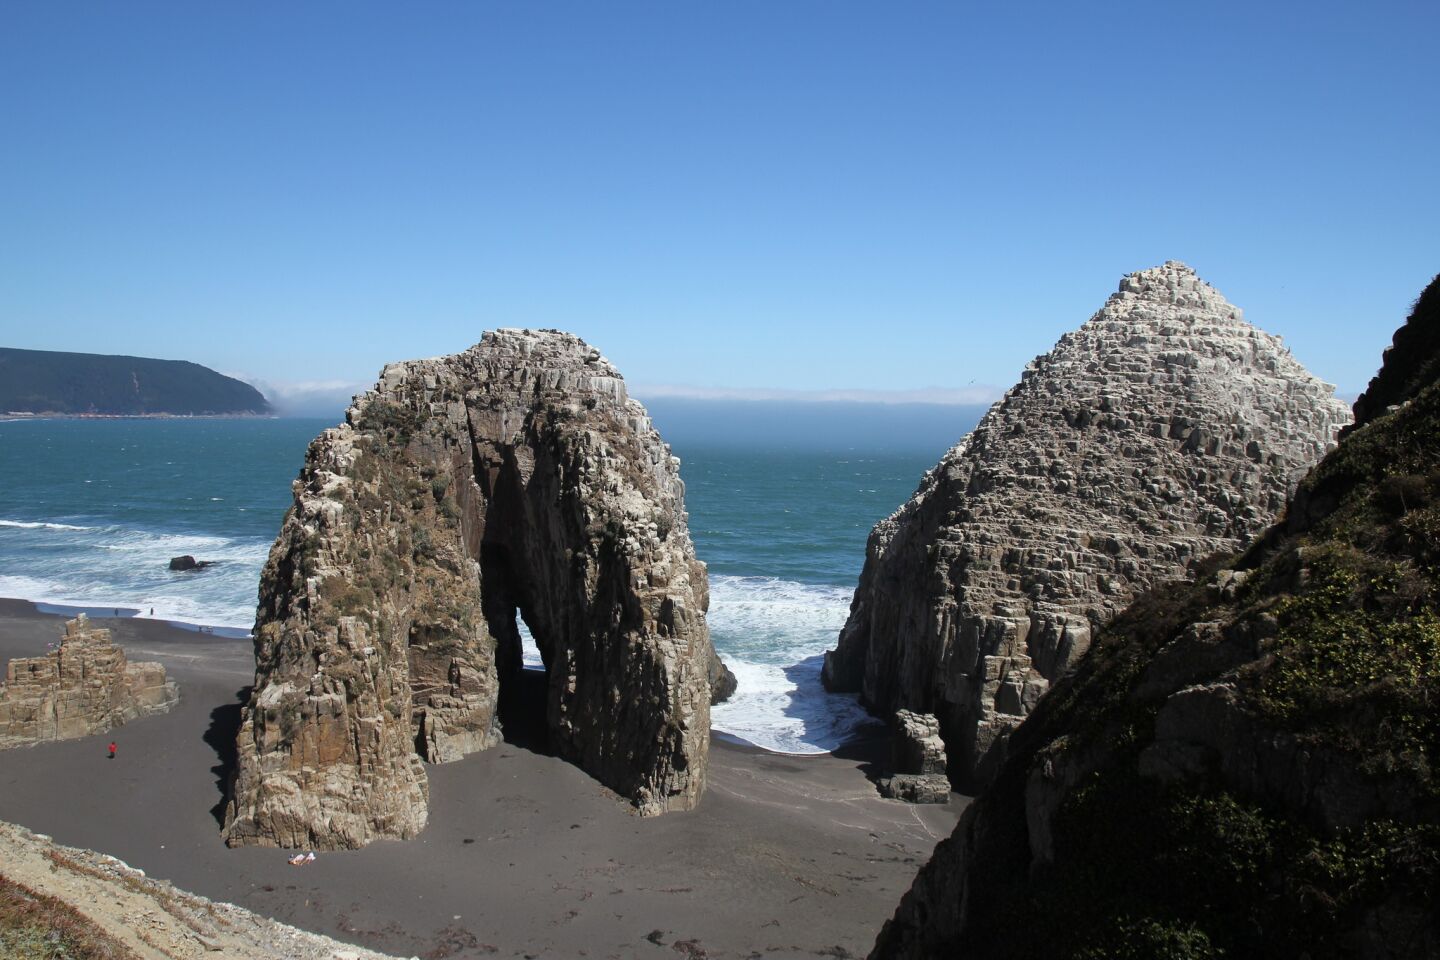 Just south of Constitución, the rugged coastline offers some pretty wondrous vistas.